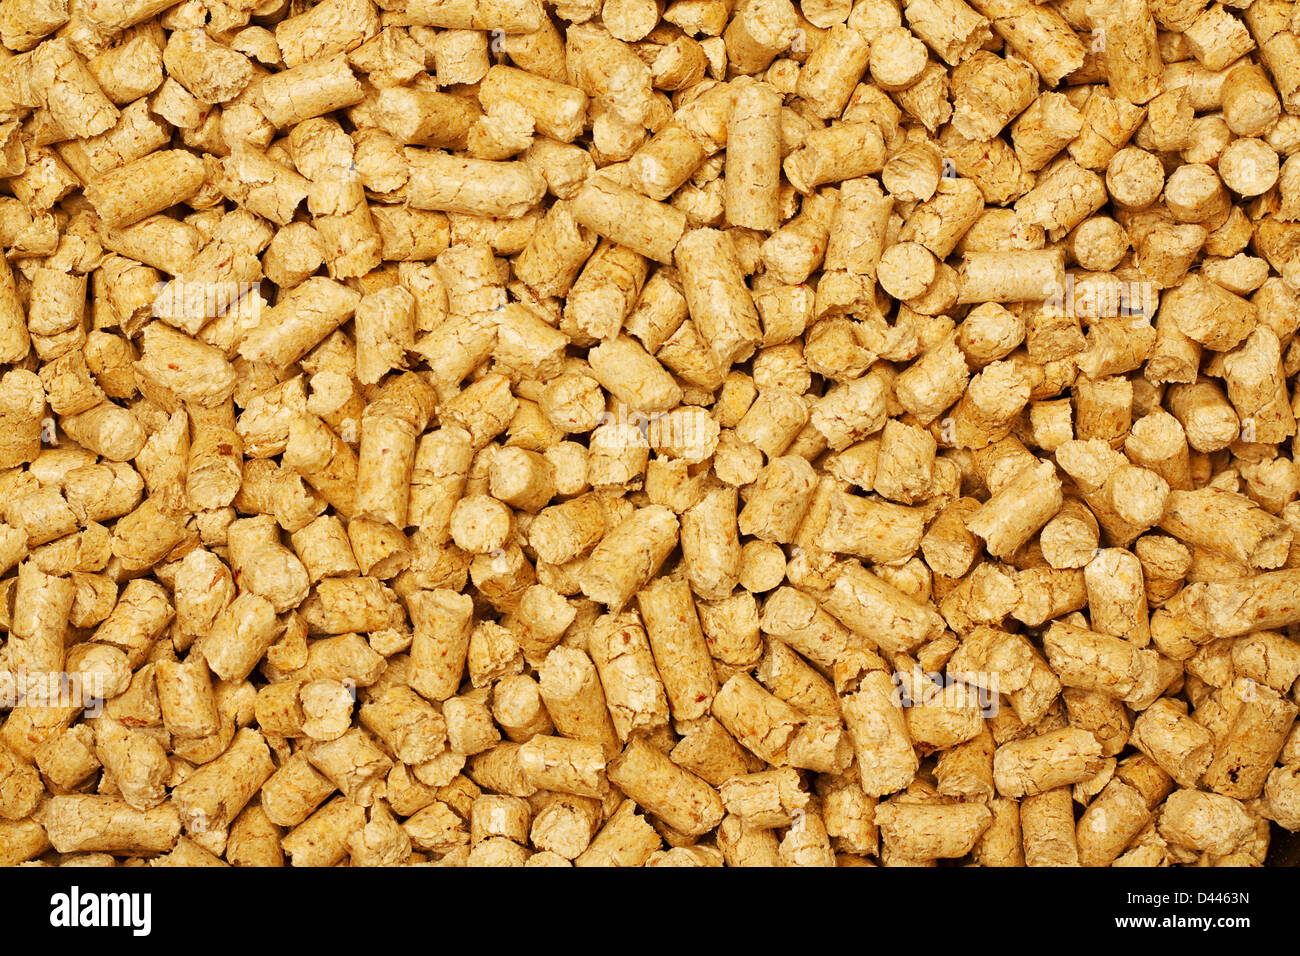 Biofuel wood pellet background used in biomass boilers as a renewable source of energy or heat Stock Photo